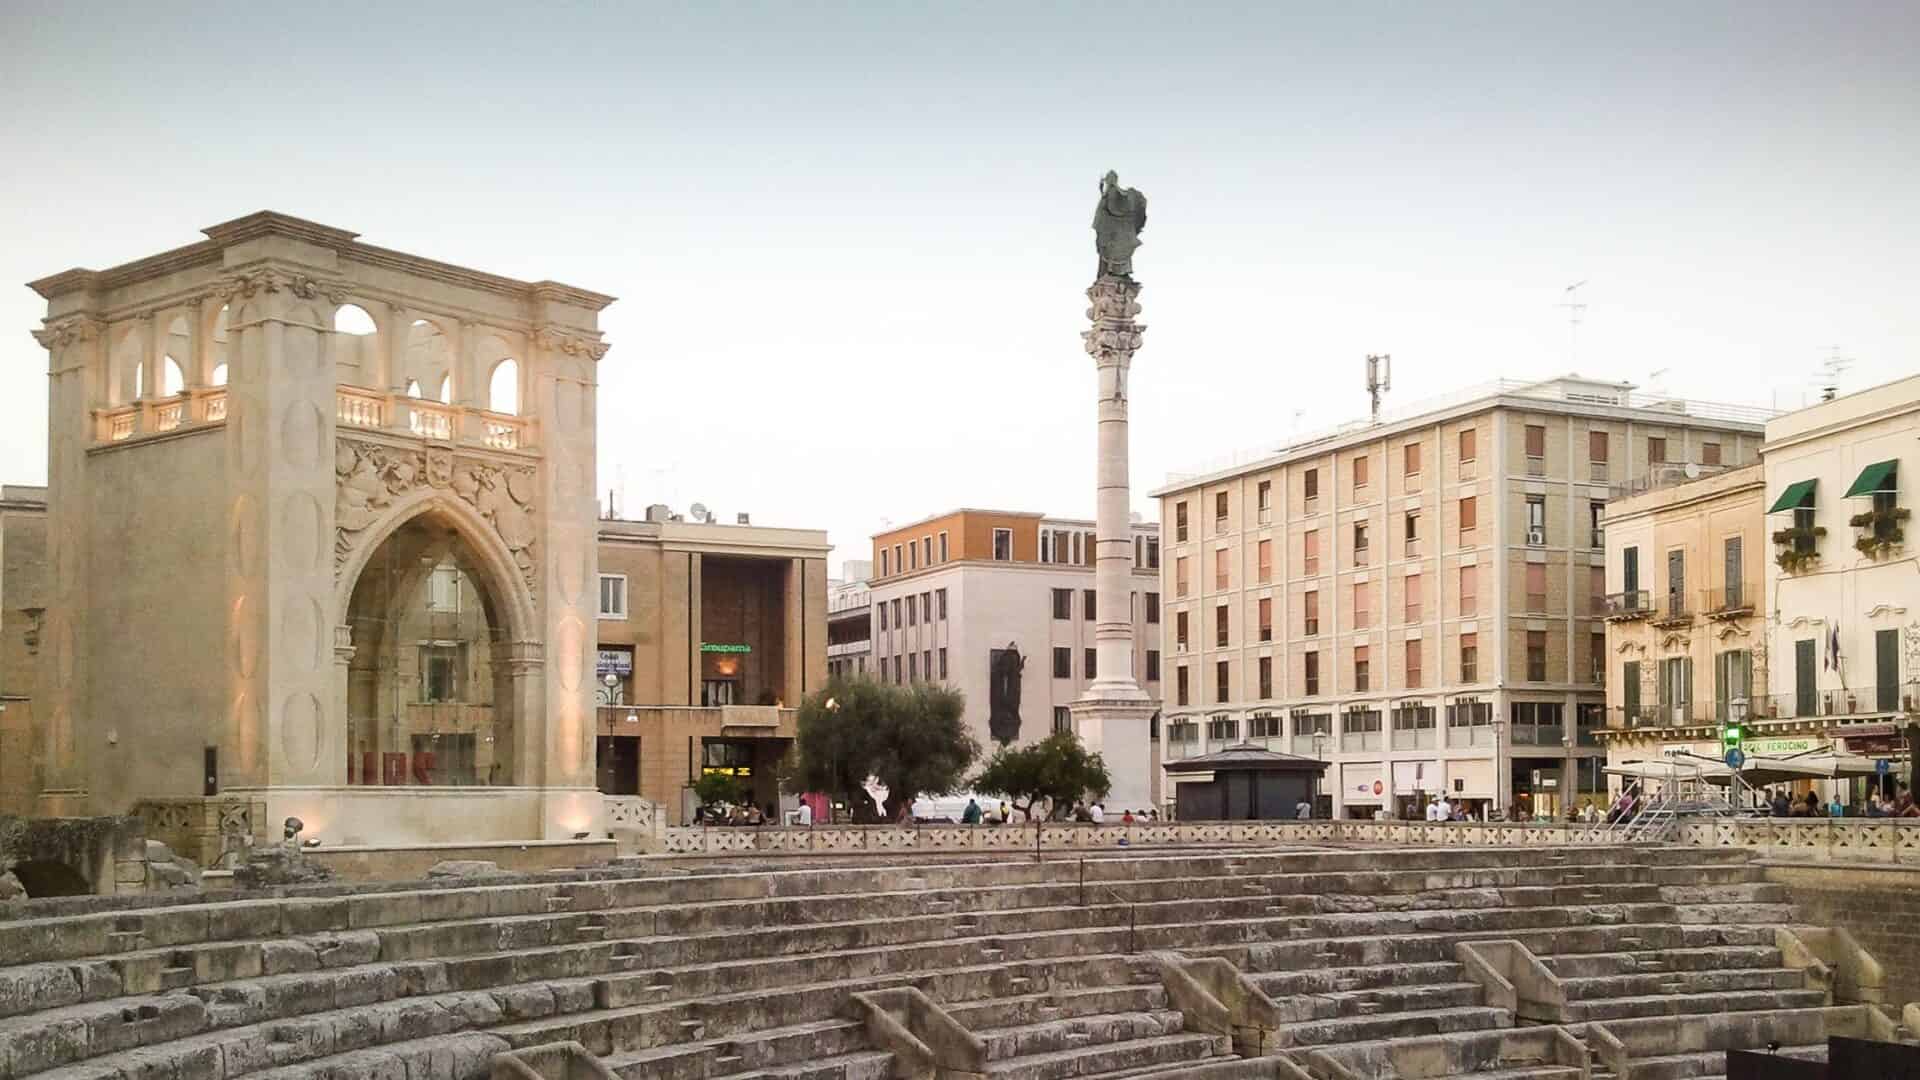 Lecce amphitheater in Italy